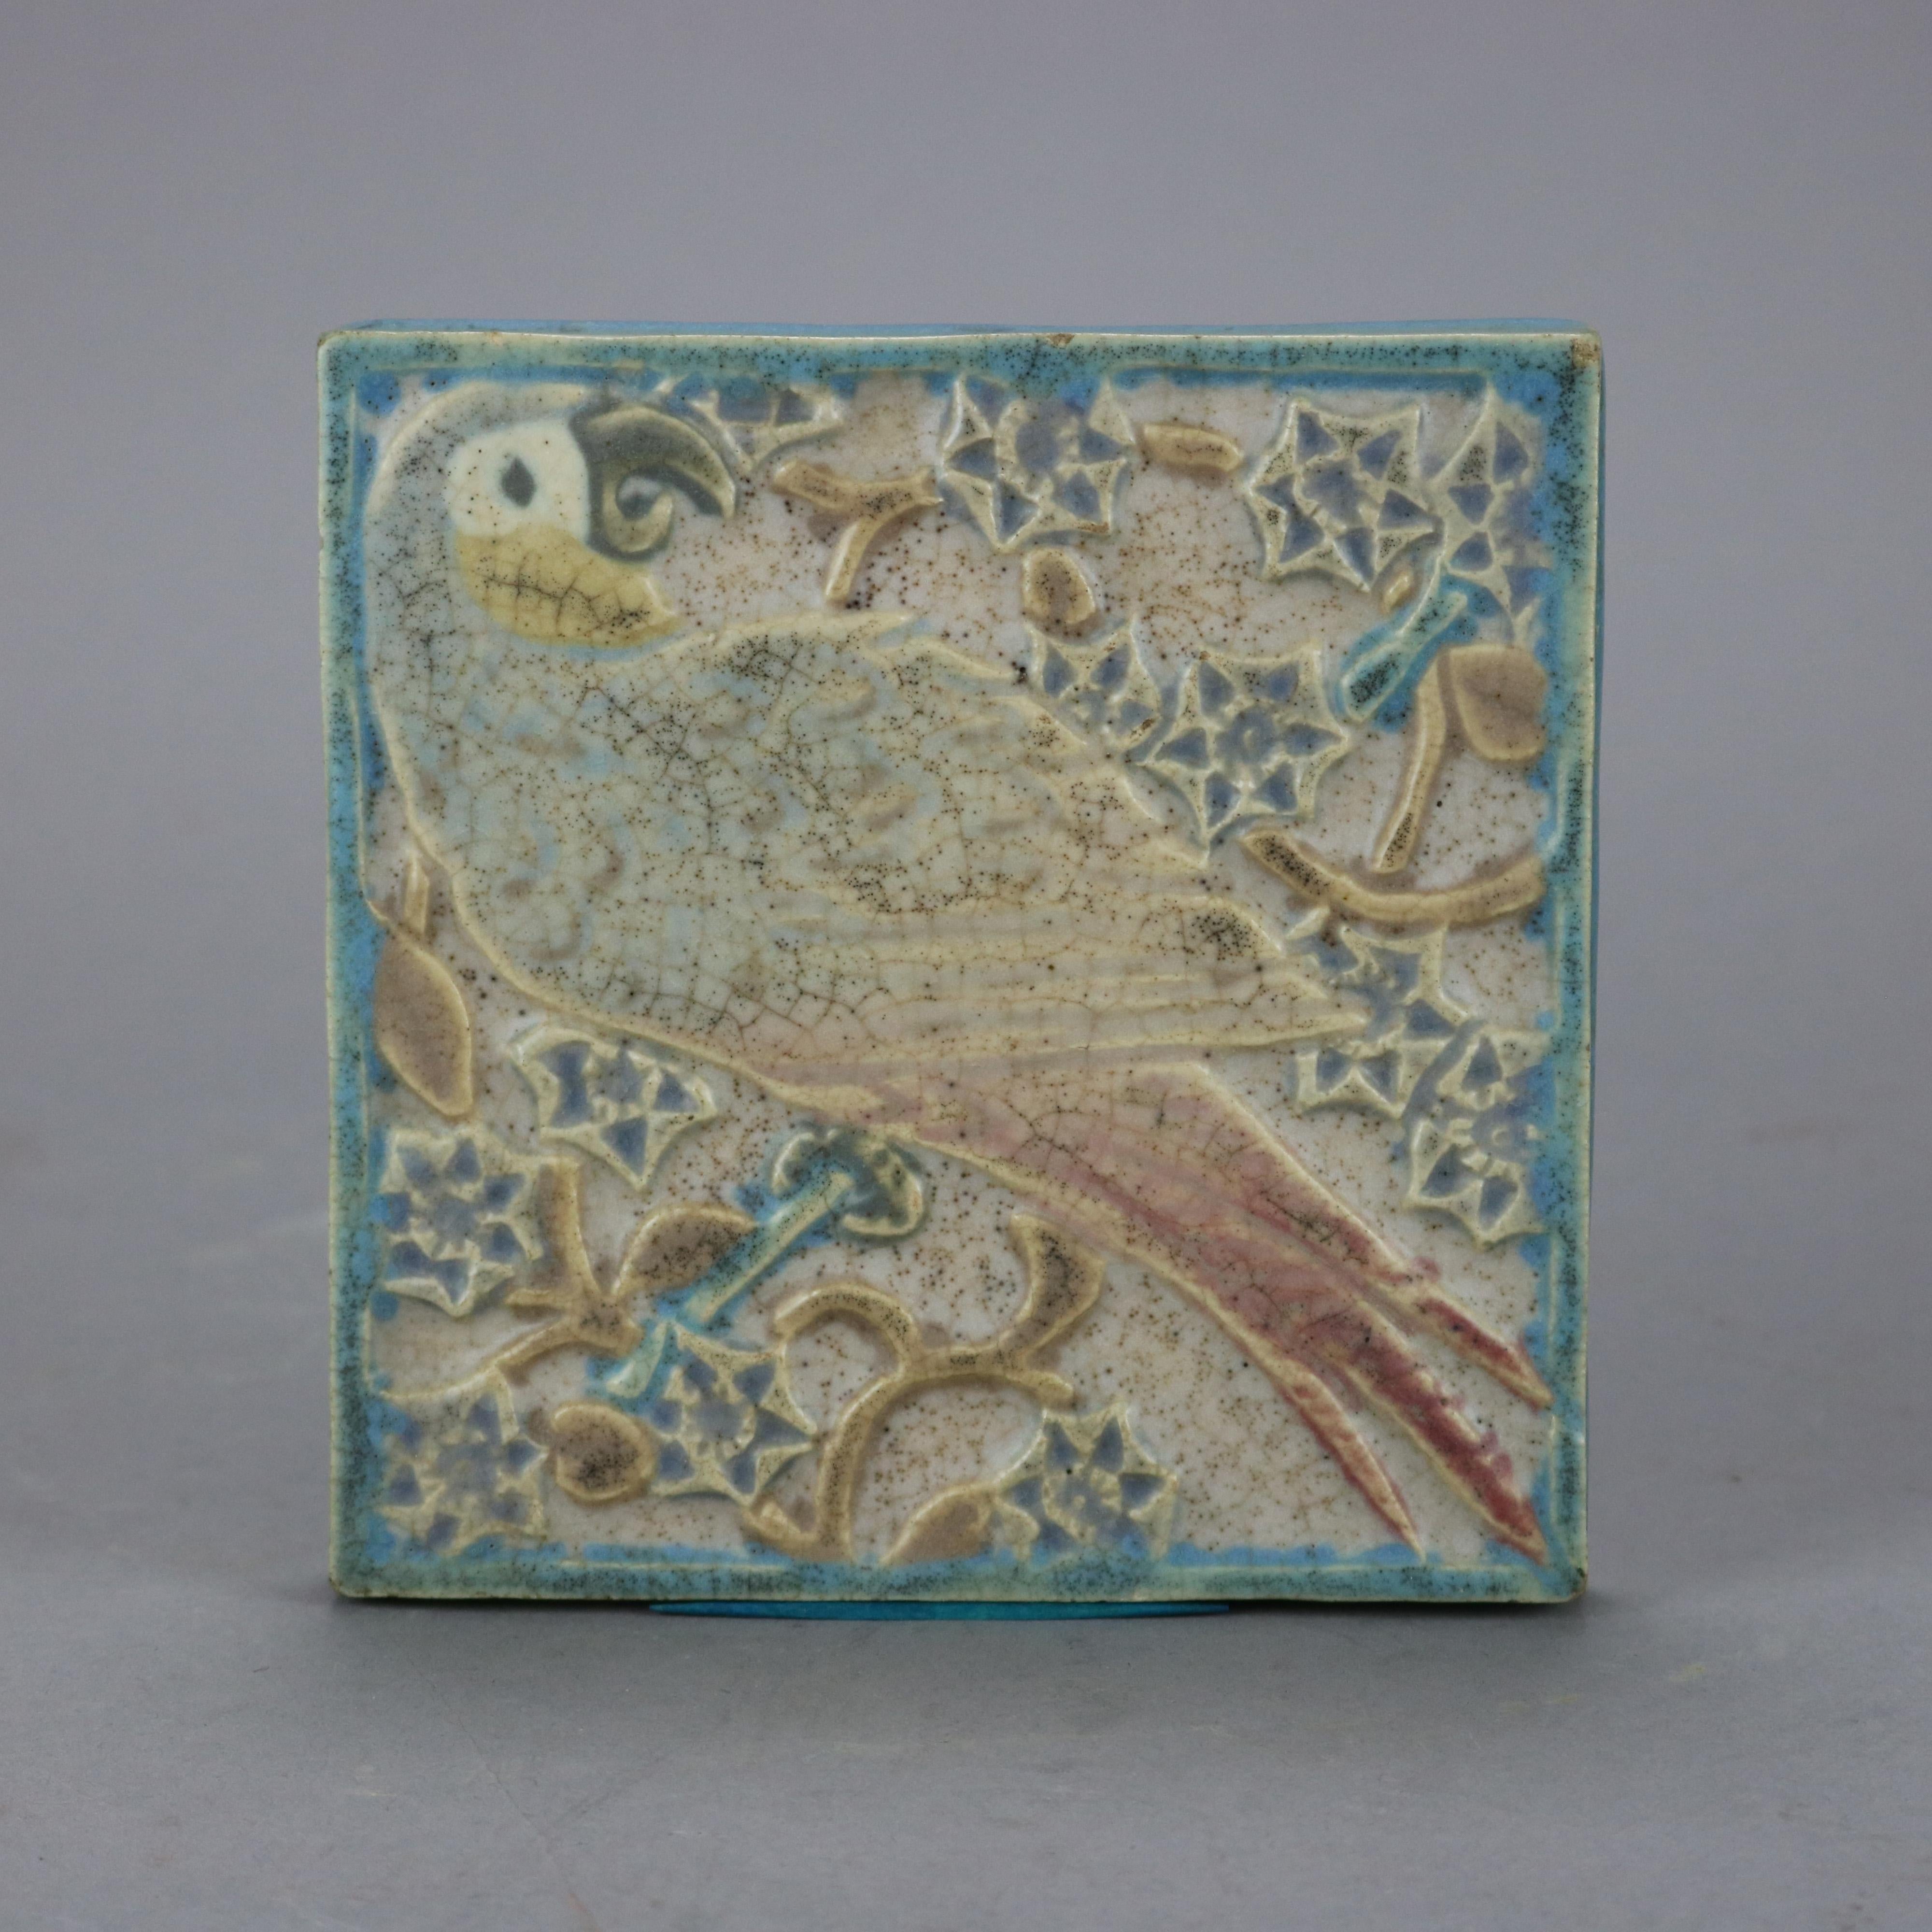 An antique Arts & Crafts tile trivet by Rookwood offers a parrot and foliate elements in relief, en verso marked as photographed, dated 1917

Measures - .5''H x 5.75''W x 5.75''D.